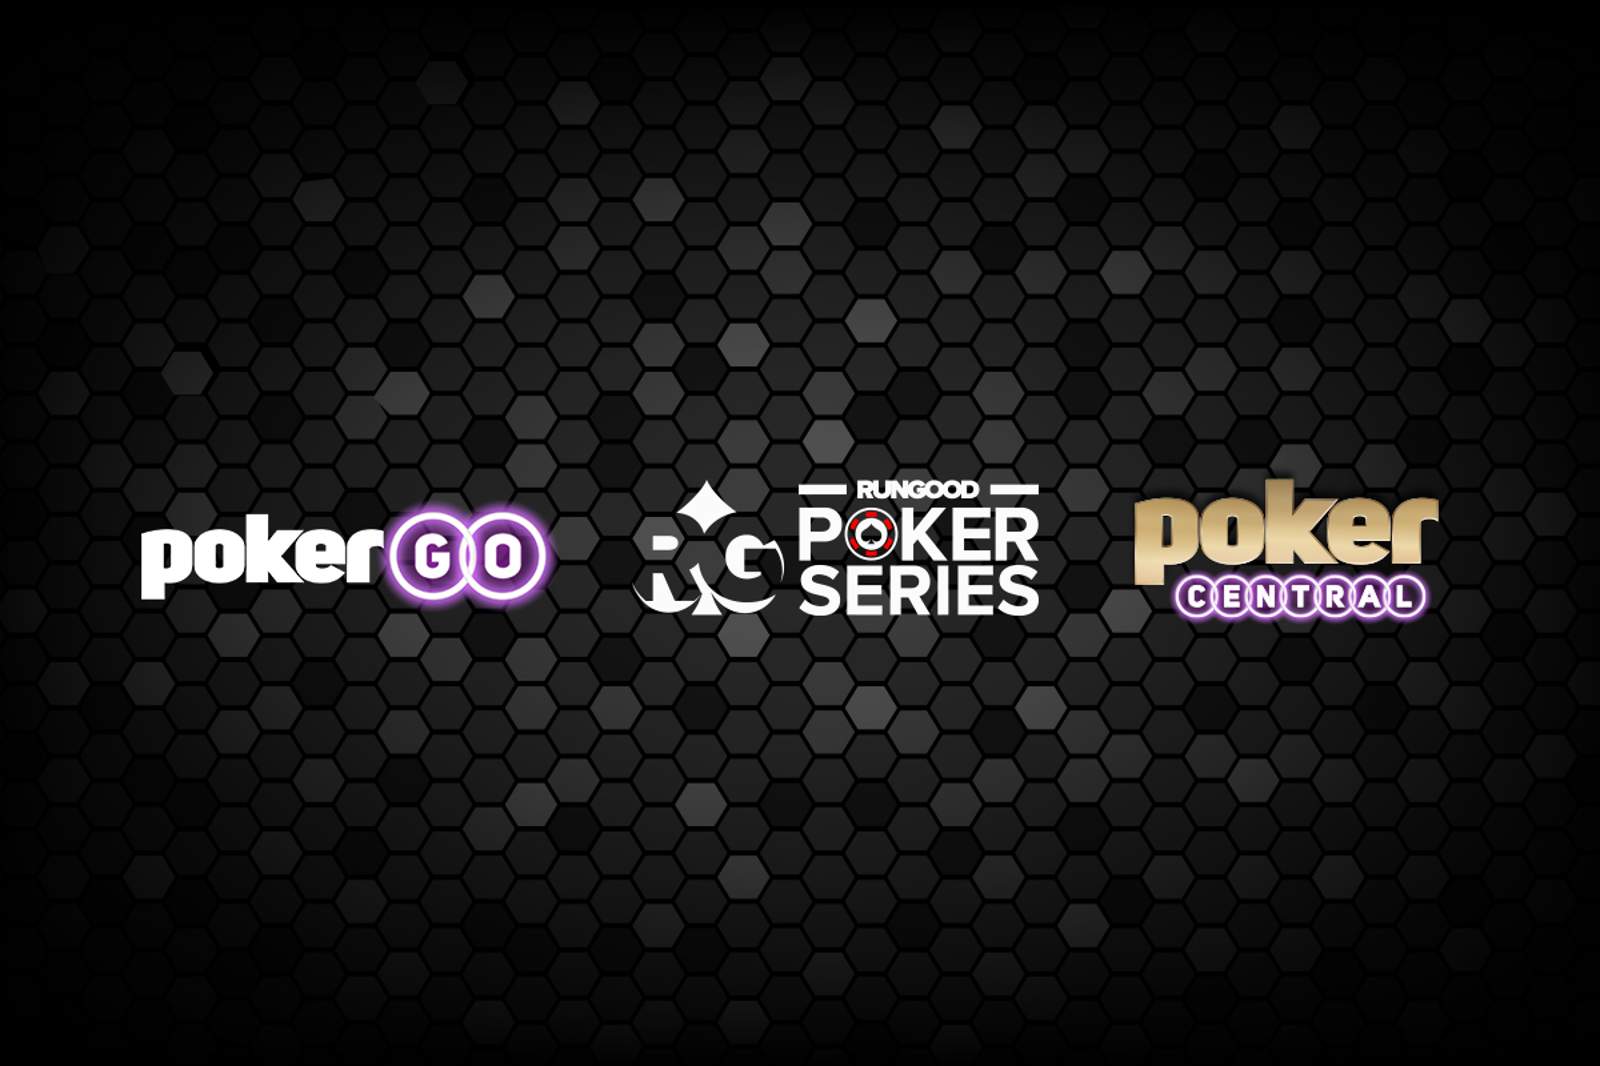 Poker Central and RunGood Poker Series Reunite For Exclusive Pro-Am PokerGO Event